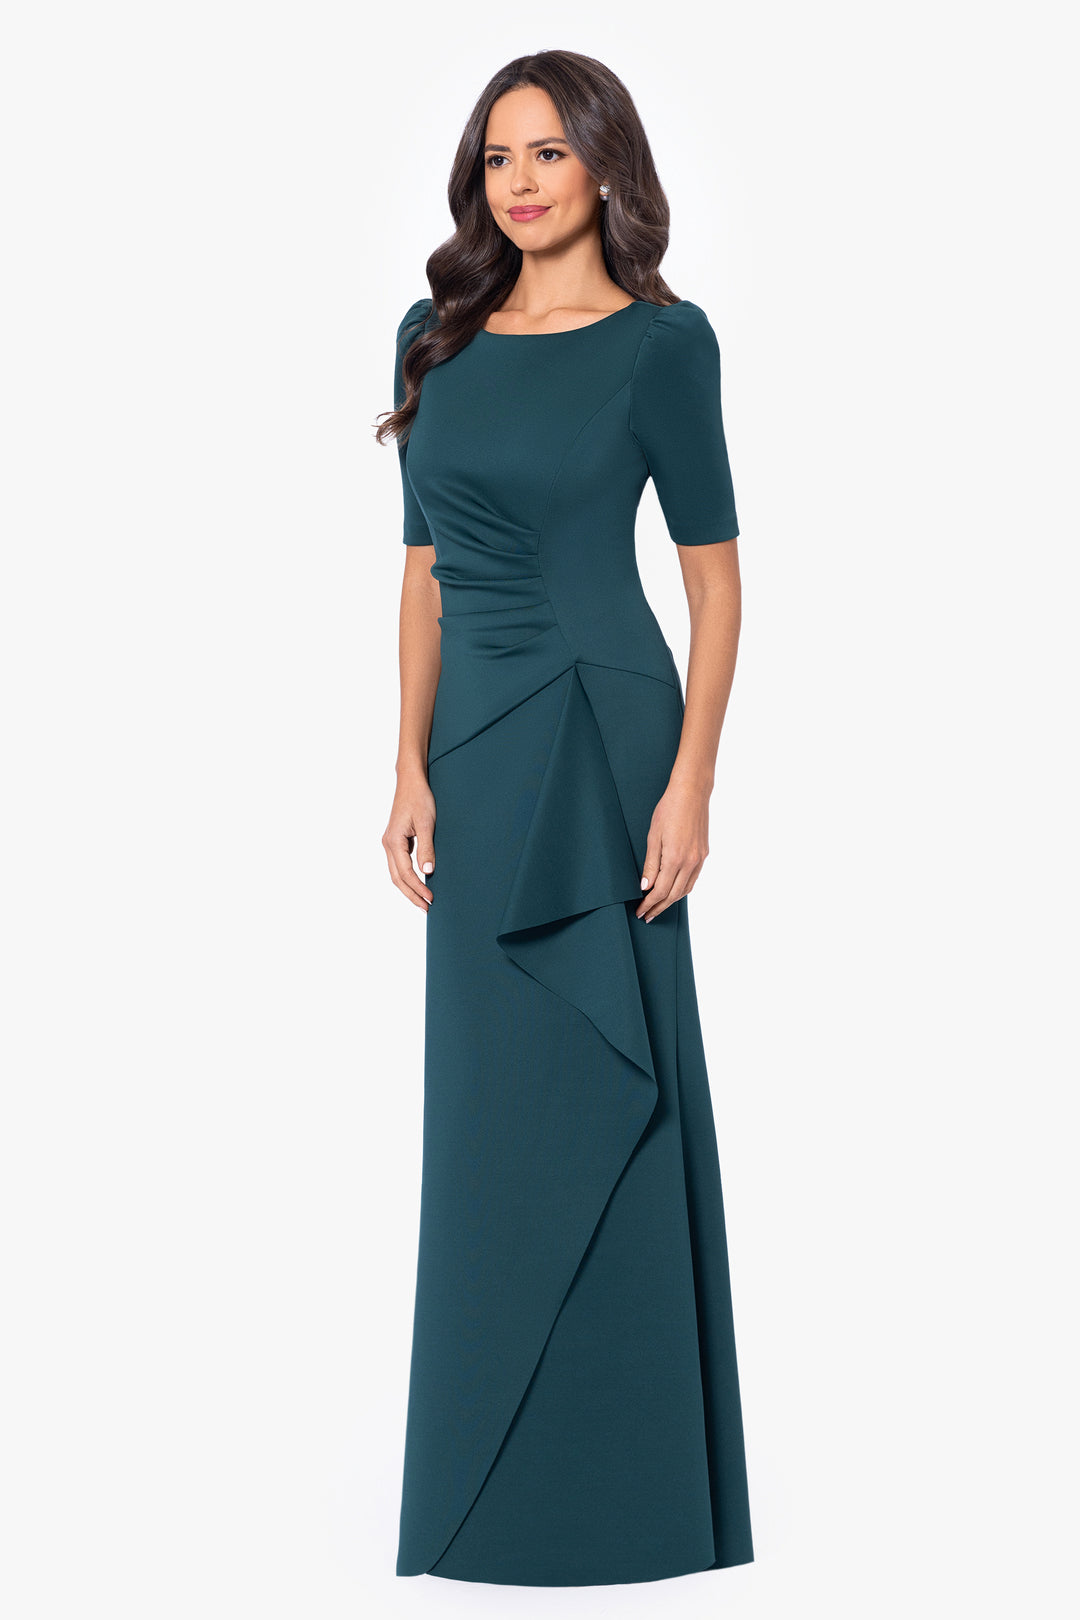 Petite "Demi" 3/4 Sleeve Side Ruched Floor Length Gown